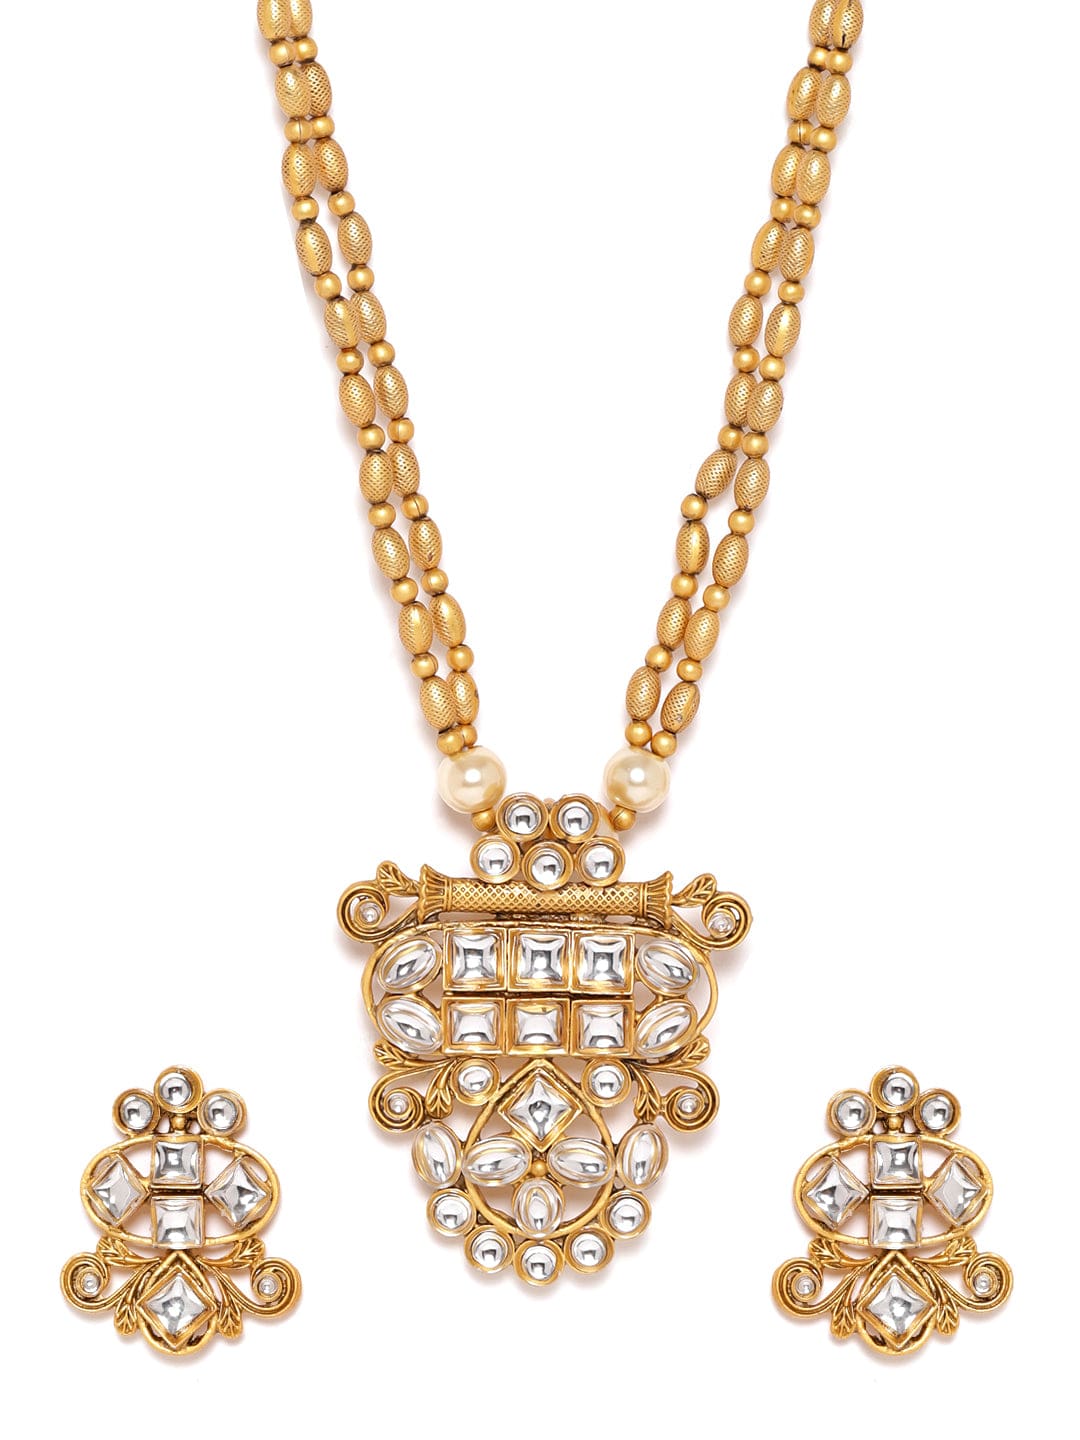 Rubans Gold and White Beads Chain with Gold-Toned Stone Pendant Necklace Set Jewellery Sets